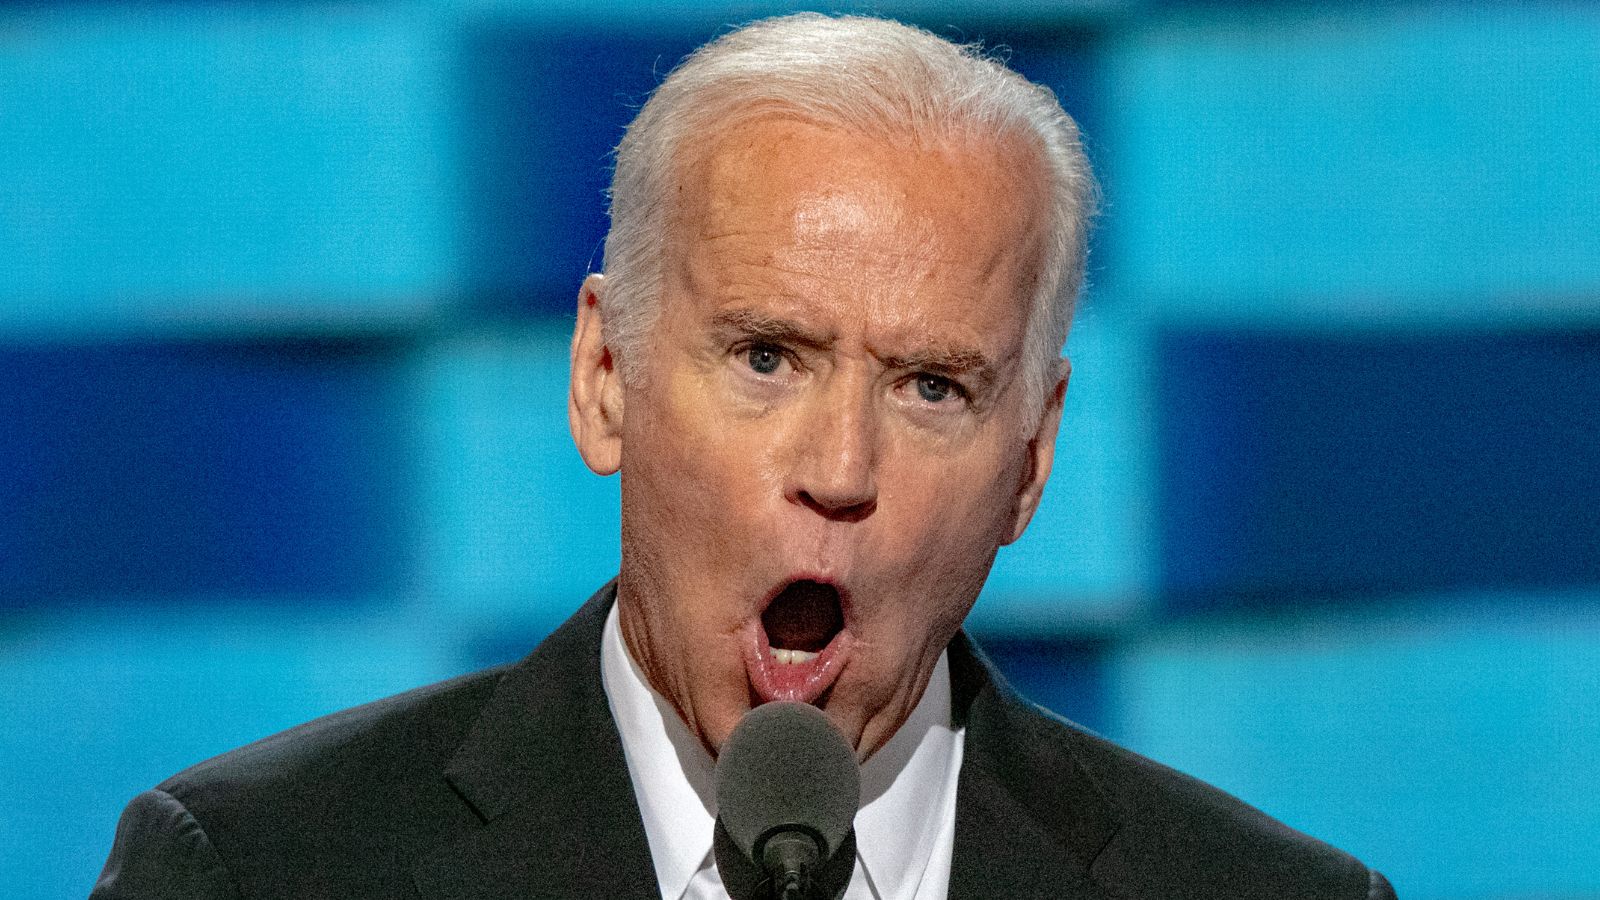 “This Ends the Press Conference”: Biden Interrupted and Led Offstage in Press Conference